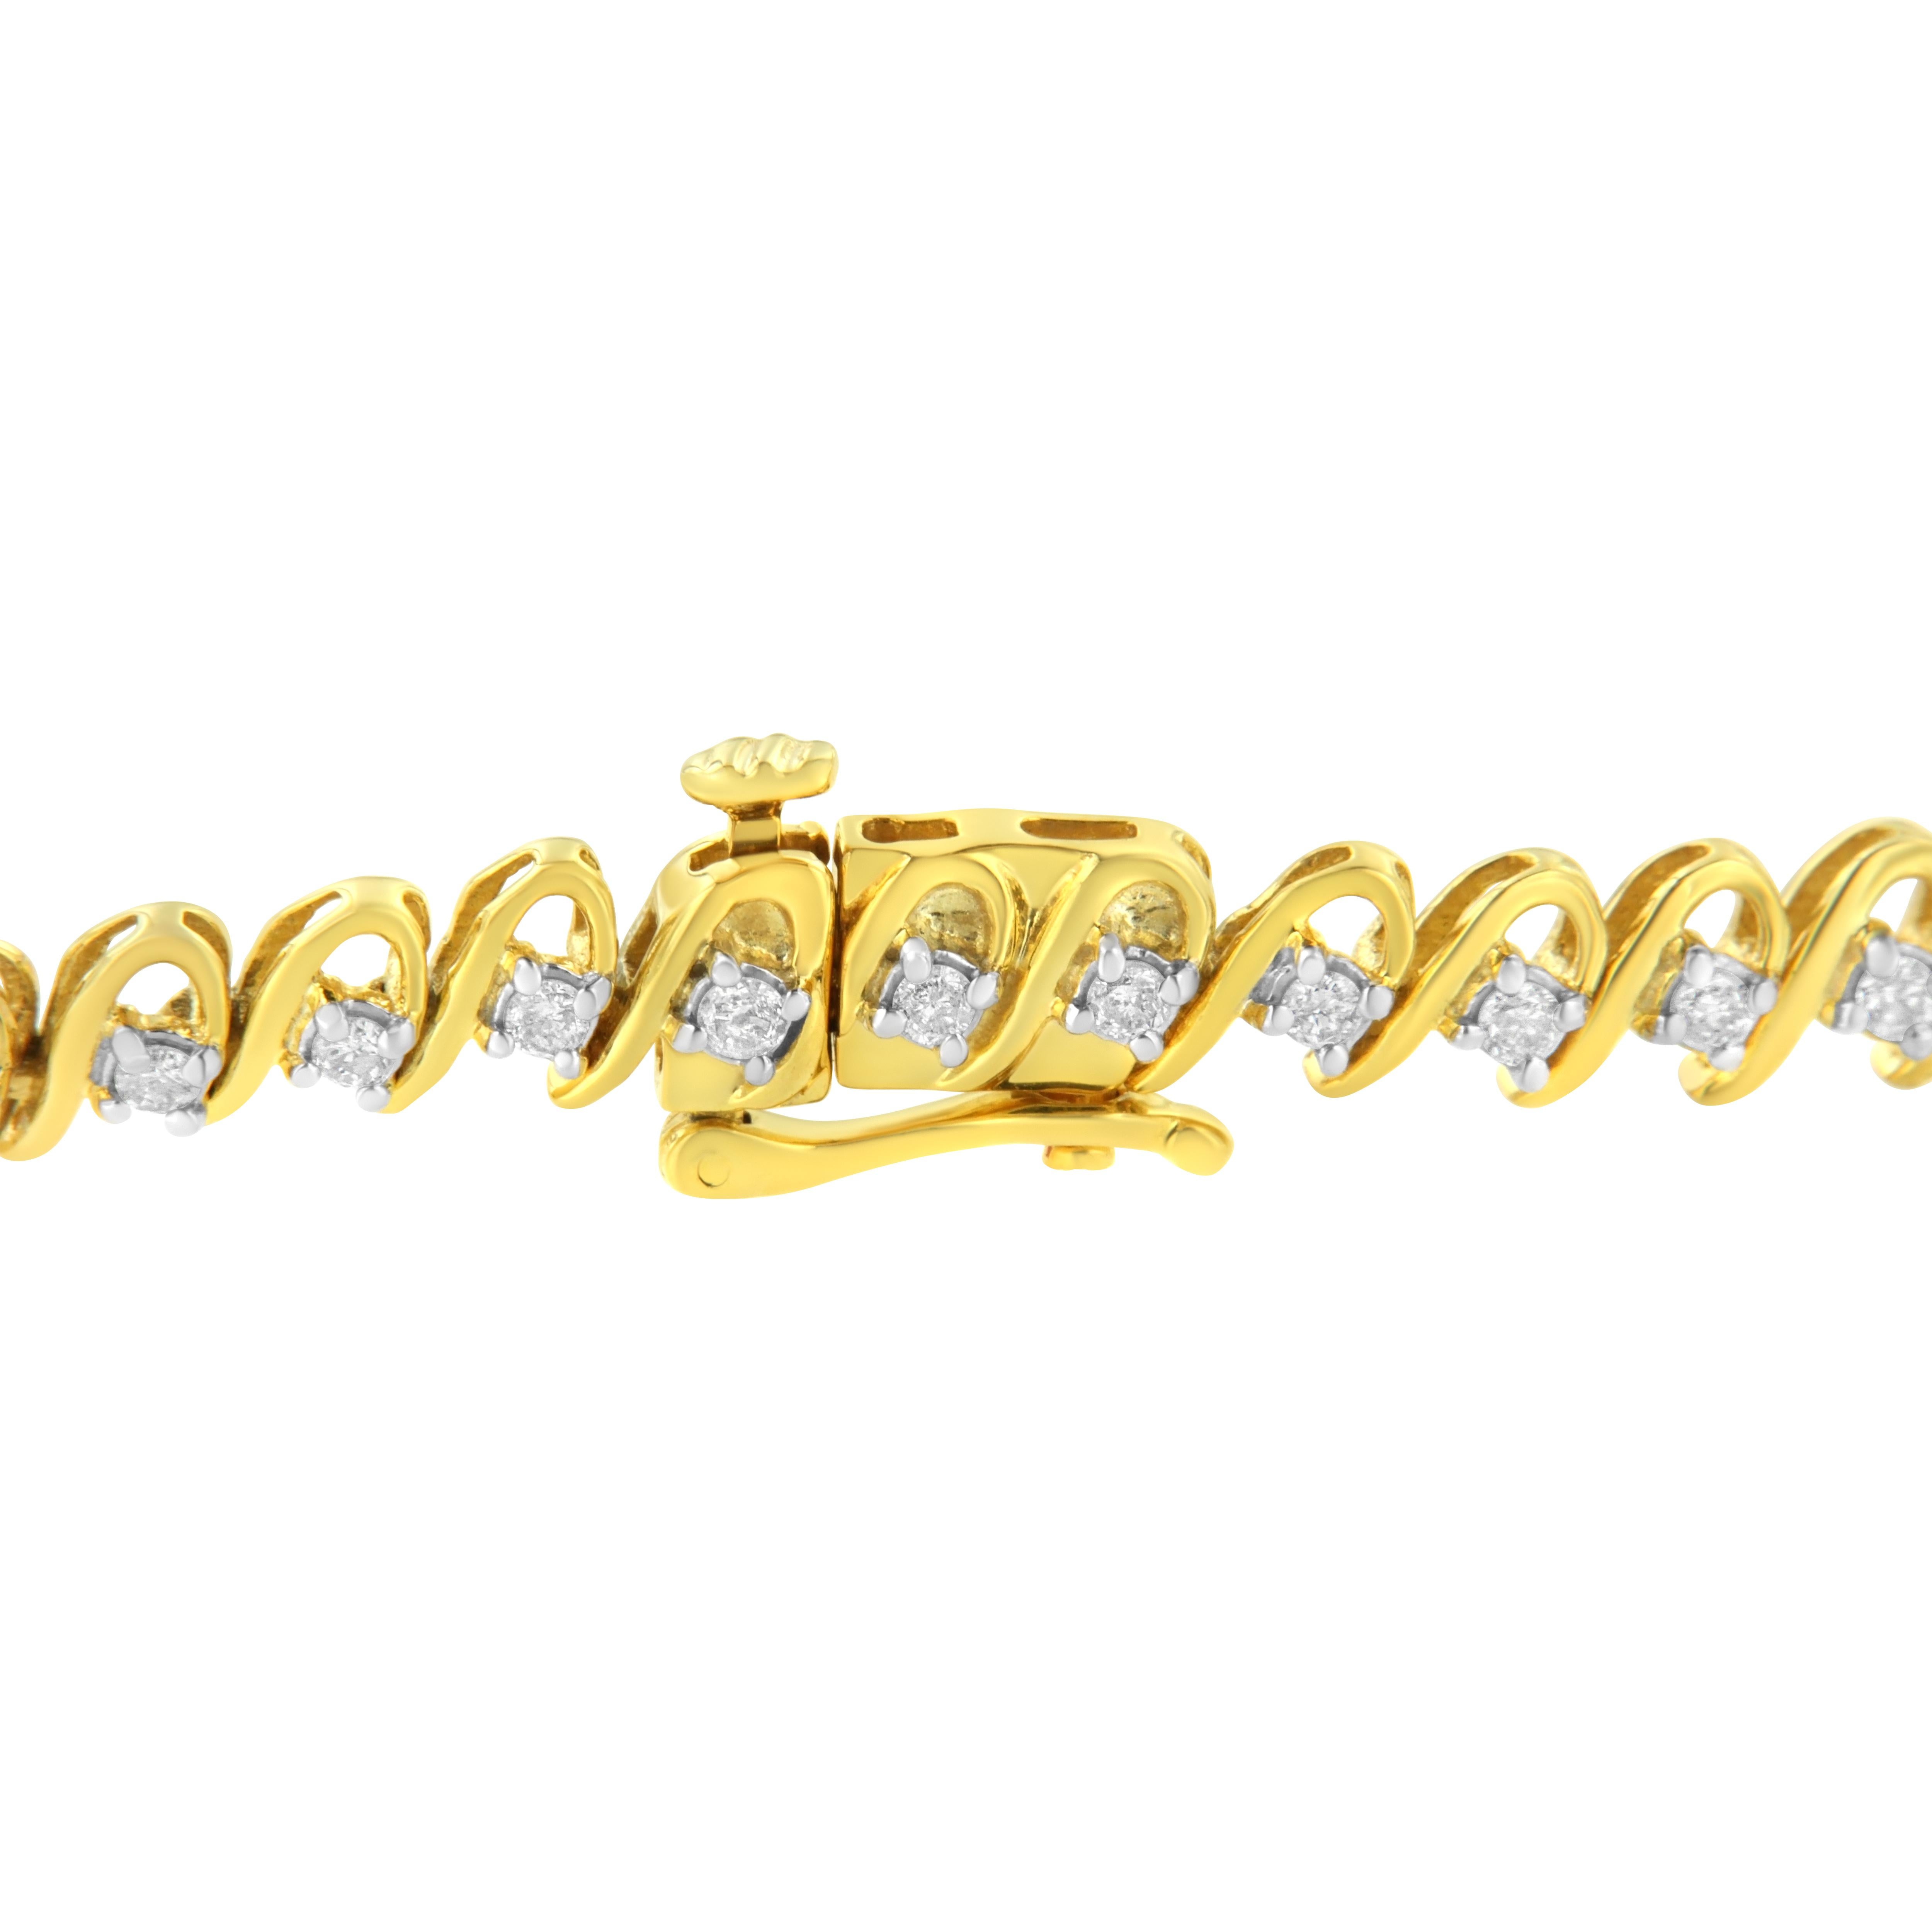 Contemporary Yellow Gold Plated Sterling Silver 1.0 Carat Diamond Link Tennis Bracelet For Sale